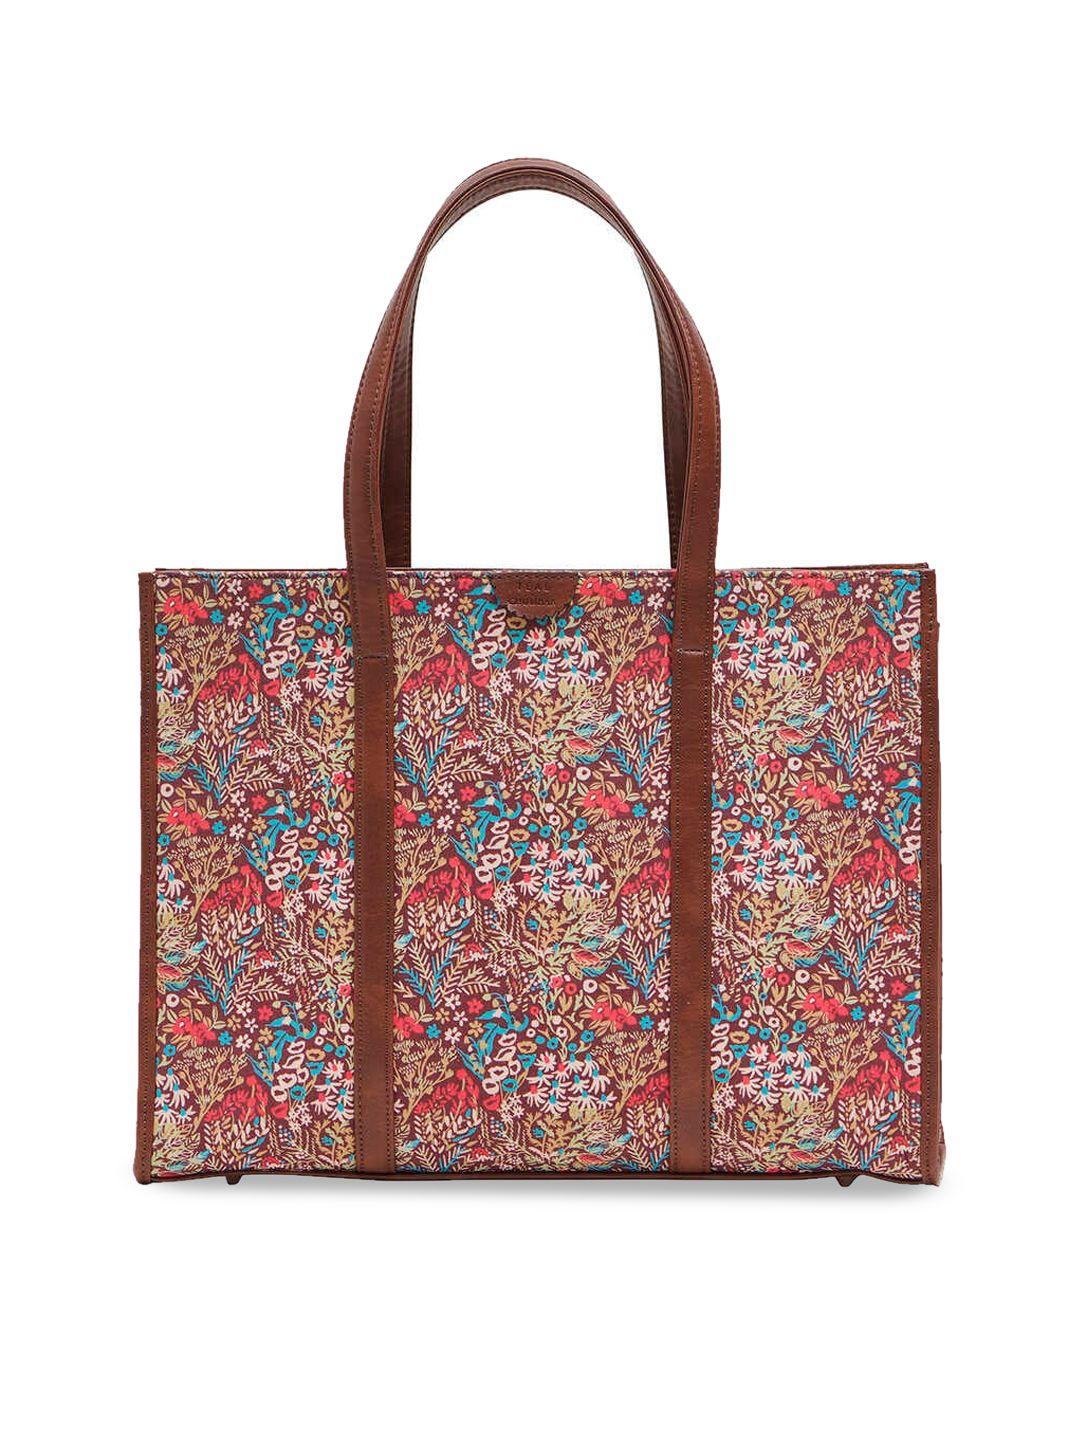 teal by chumbak floral printed oversized shopper tote bag